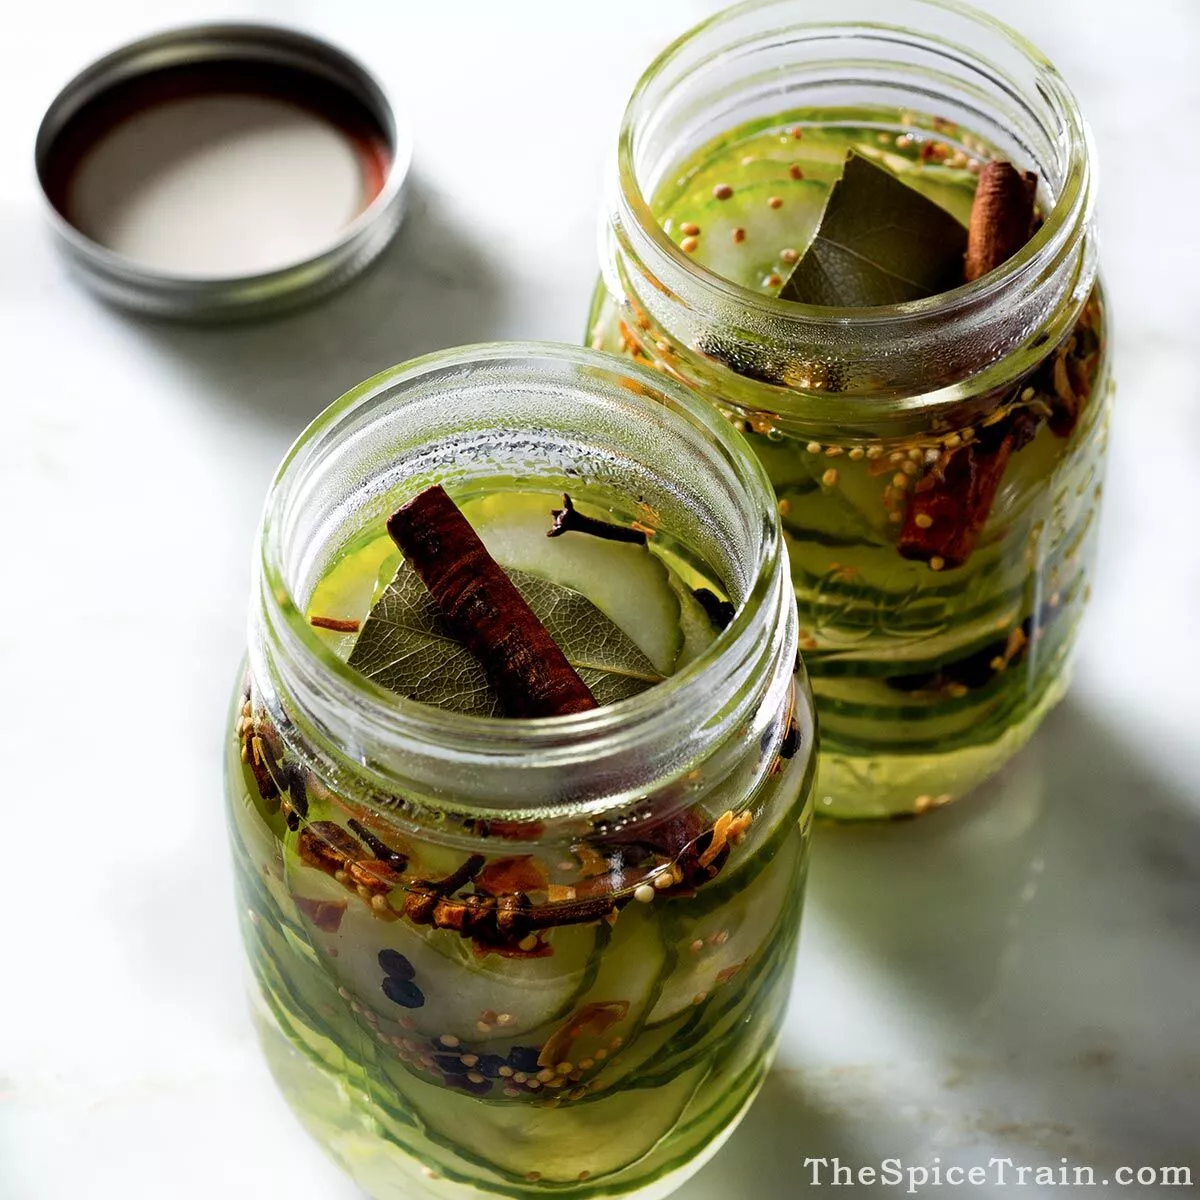 Homemade pickles in open mason jars on a white surface.